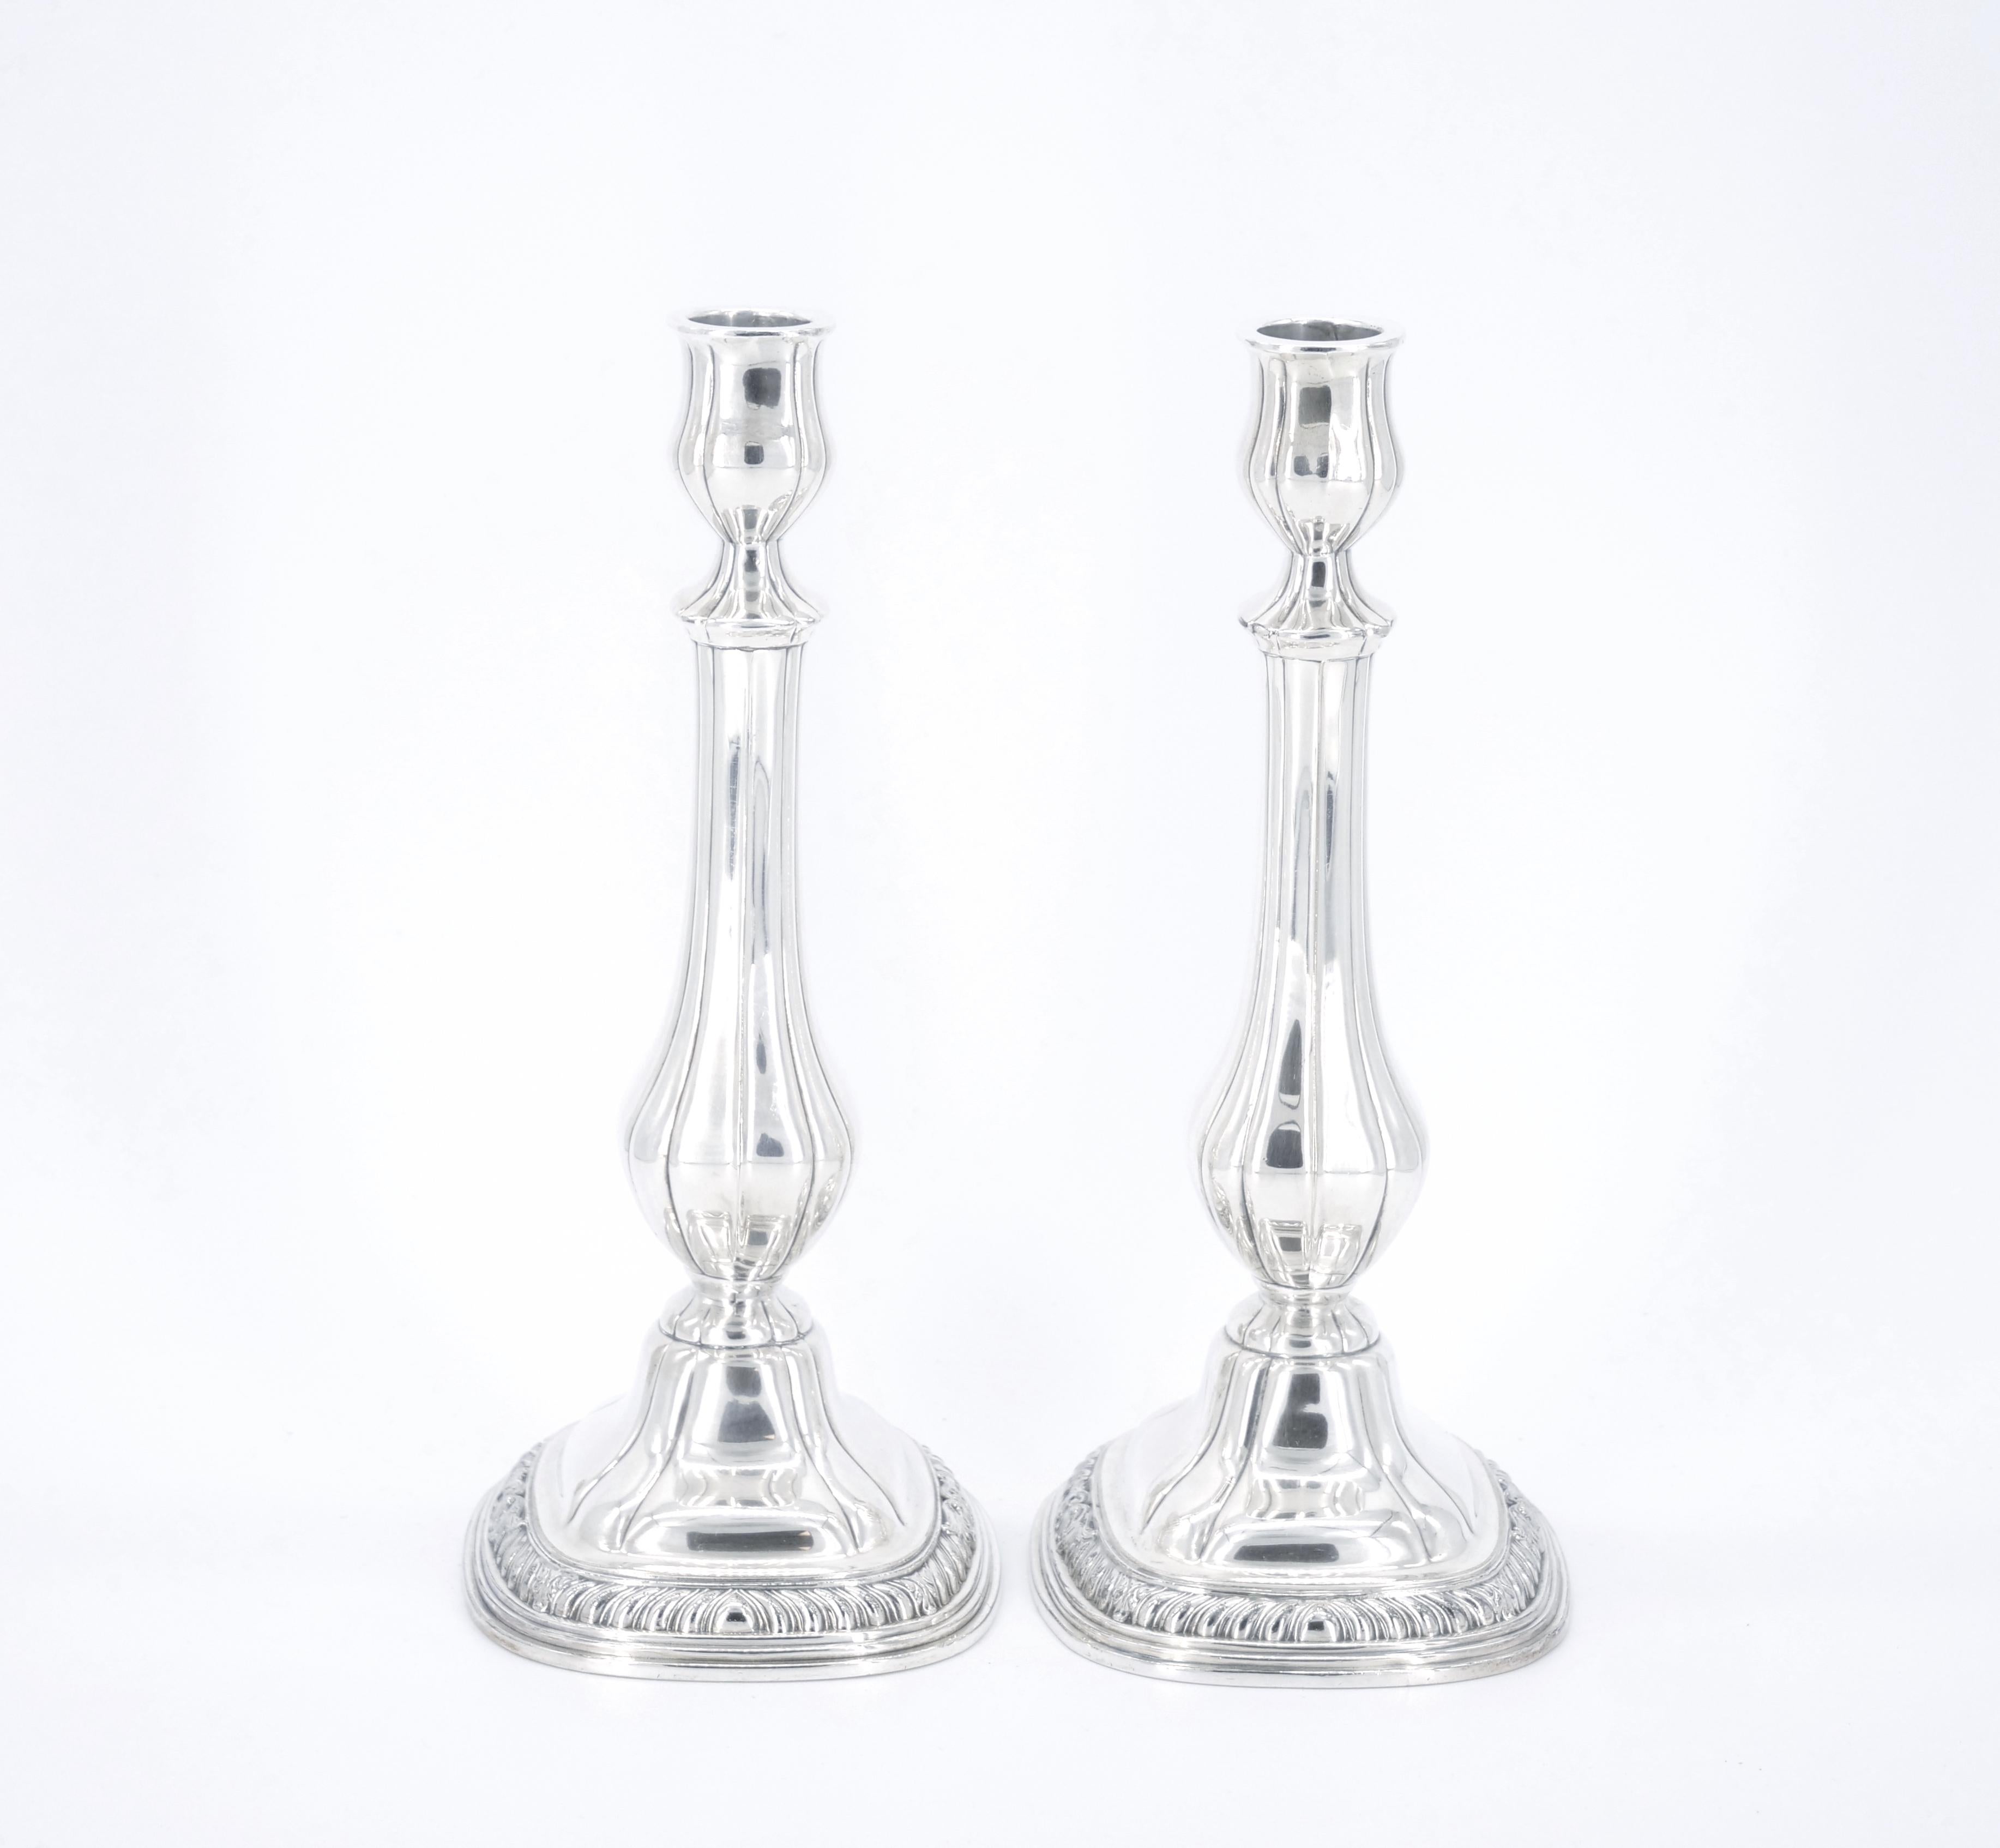 Pair Gorham Silverplate Candlesticks in the English Regency Style For Sale 4